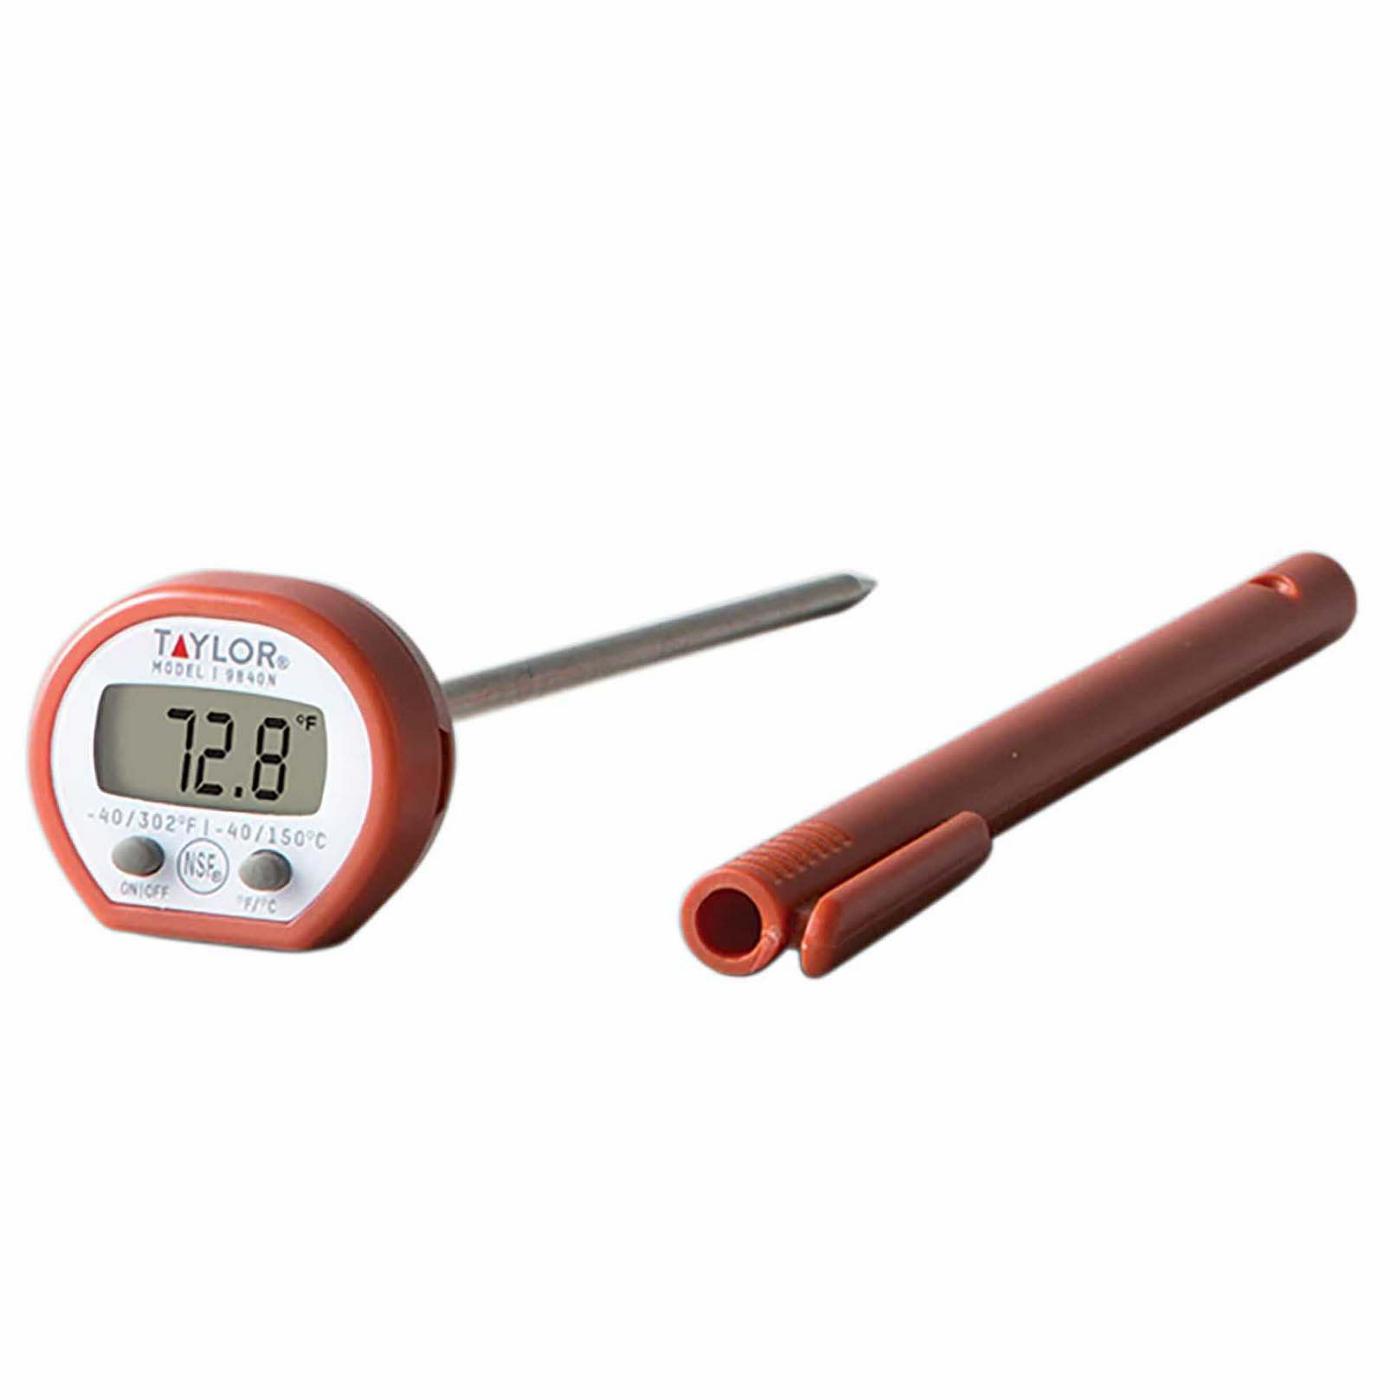 Taylor Anti-Microbial Instant Read Thermometer - Shop Utensils & Gadgets at  H-E-B